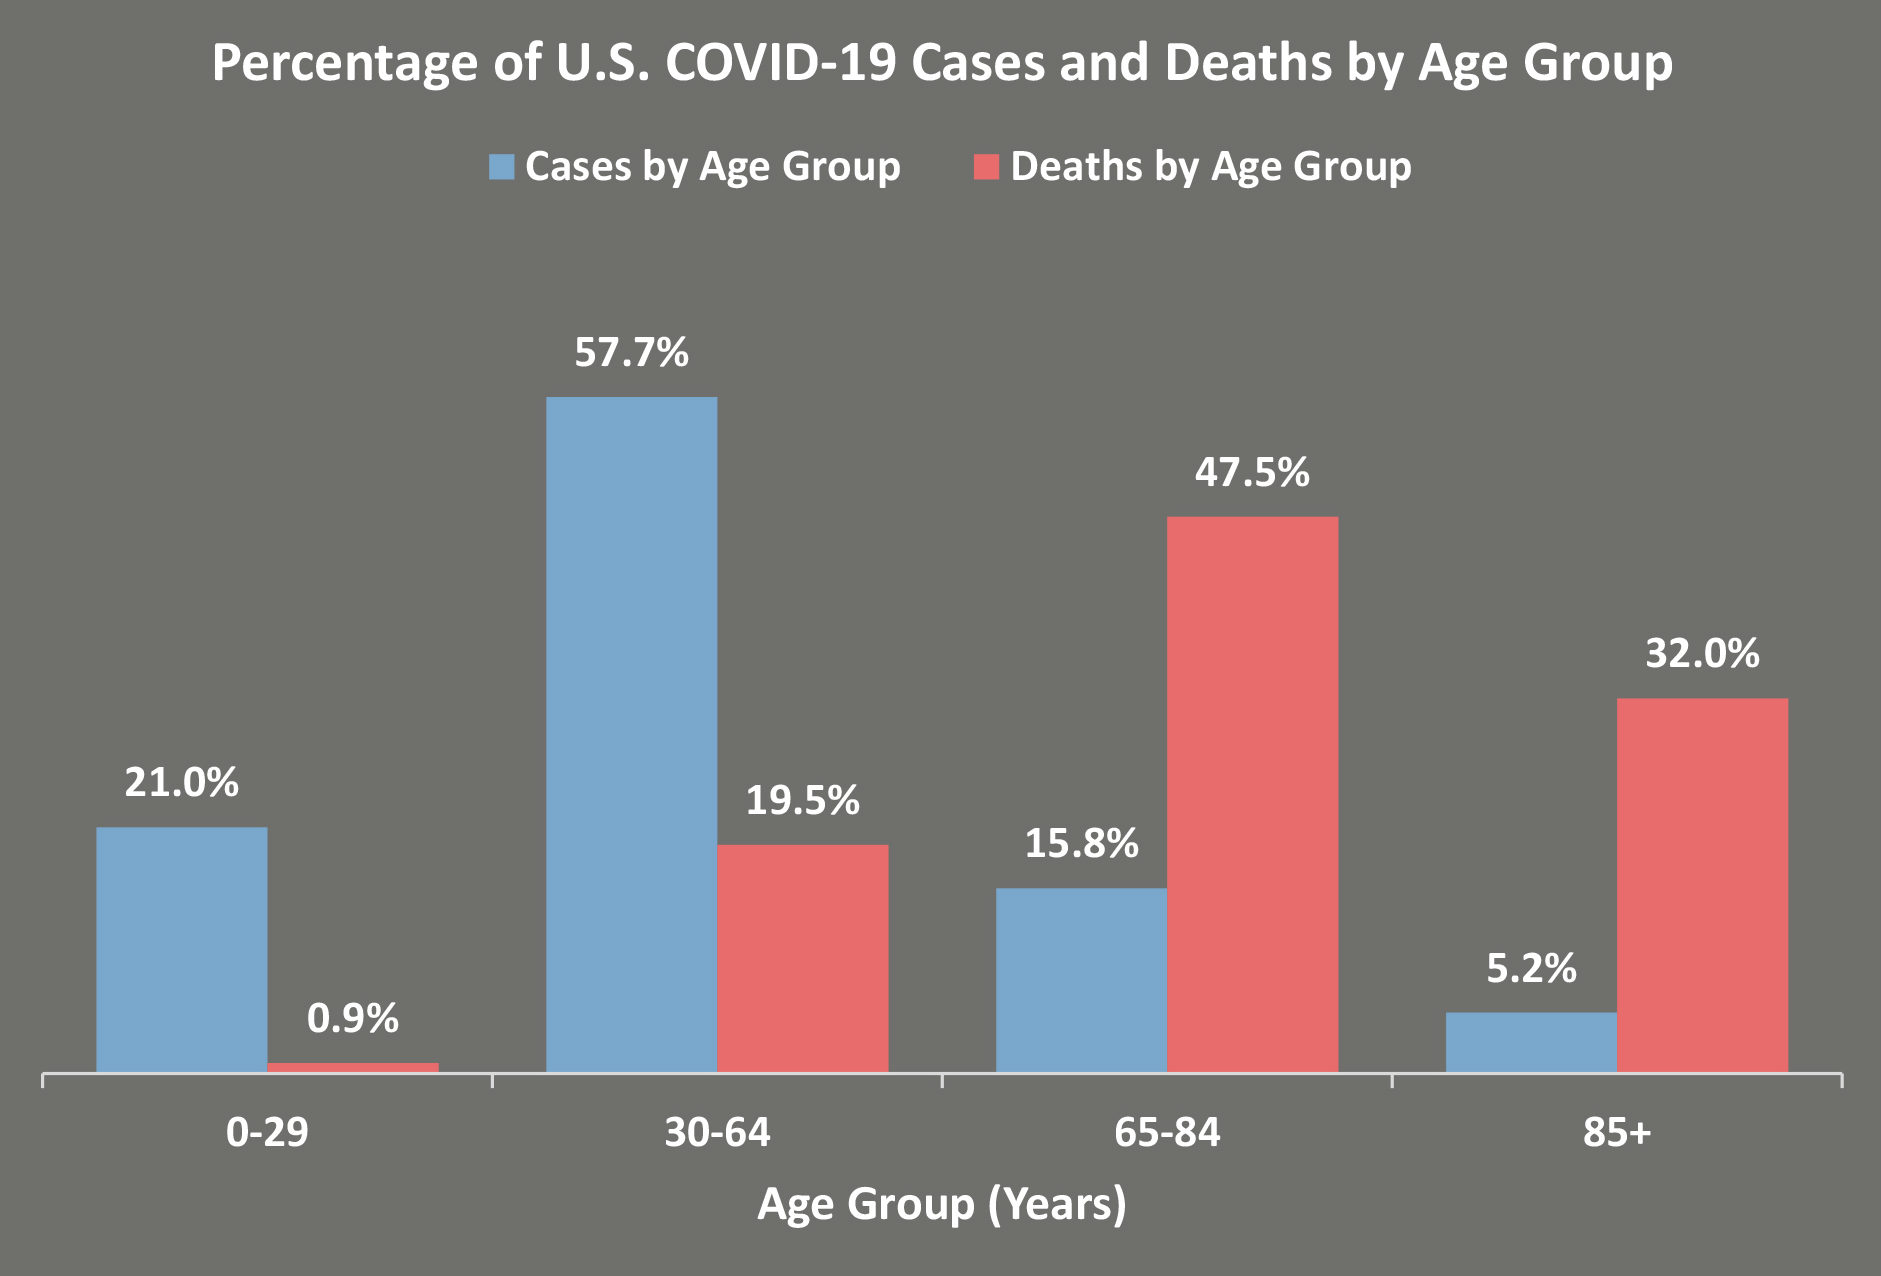 Bar graph depicting the percentage of U.S. COVID-19 Cases and Deaths by Age Group.